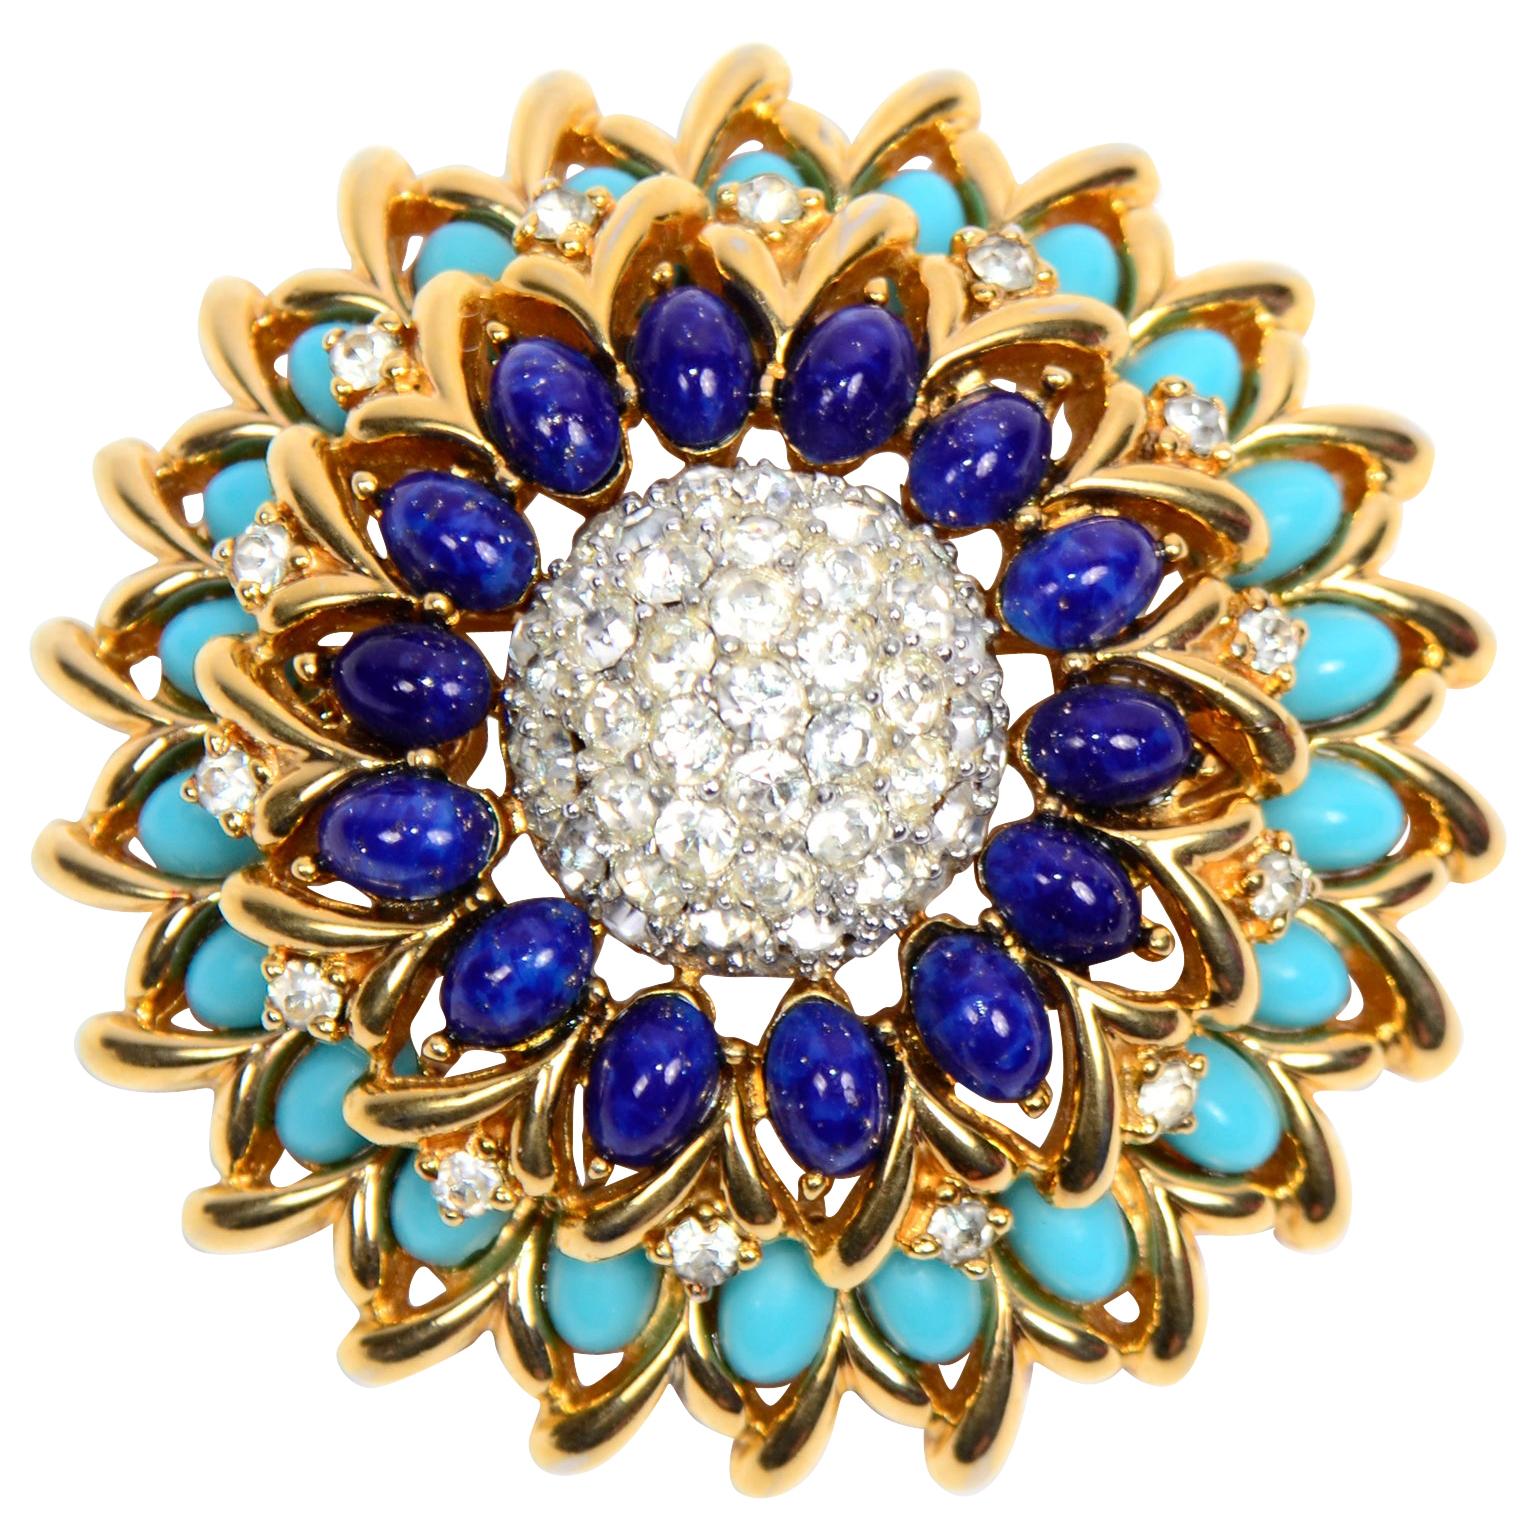 Vintage Jomaz Brooch With Turquoise and Lapis Blue Oval Stones and Rhinestones